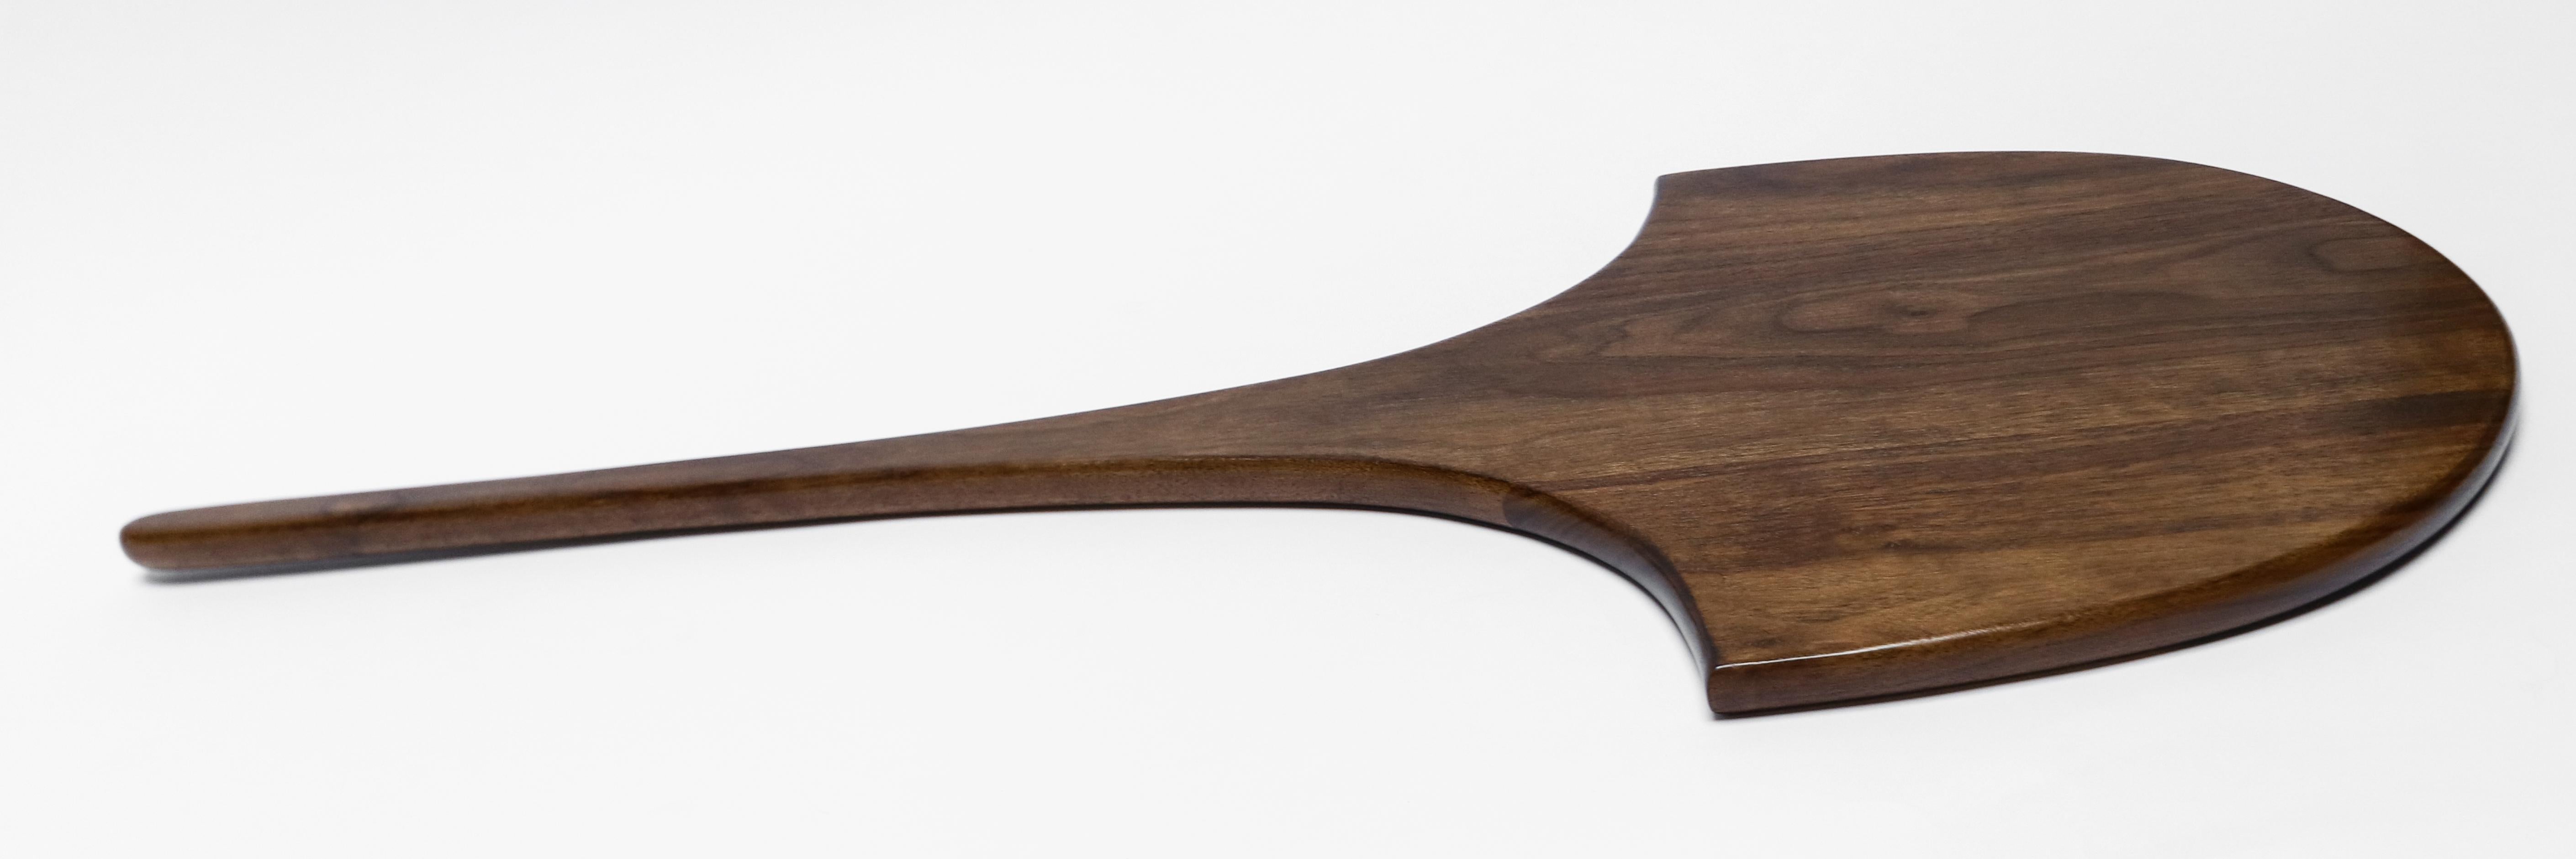 Custom Walnut Serving Board with Long Handle by Adesso Imports For Sale 2